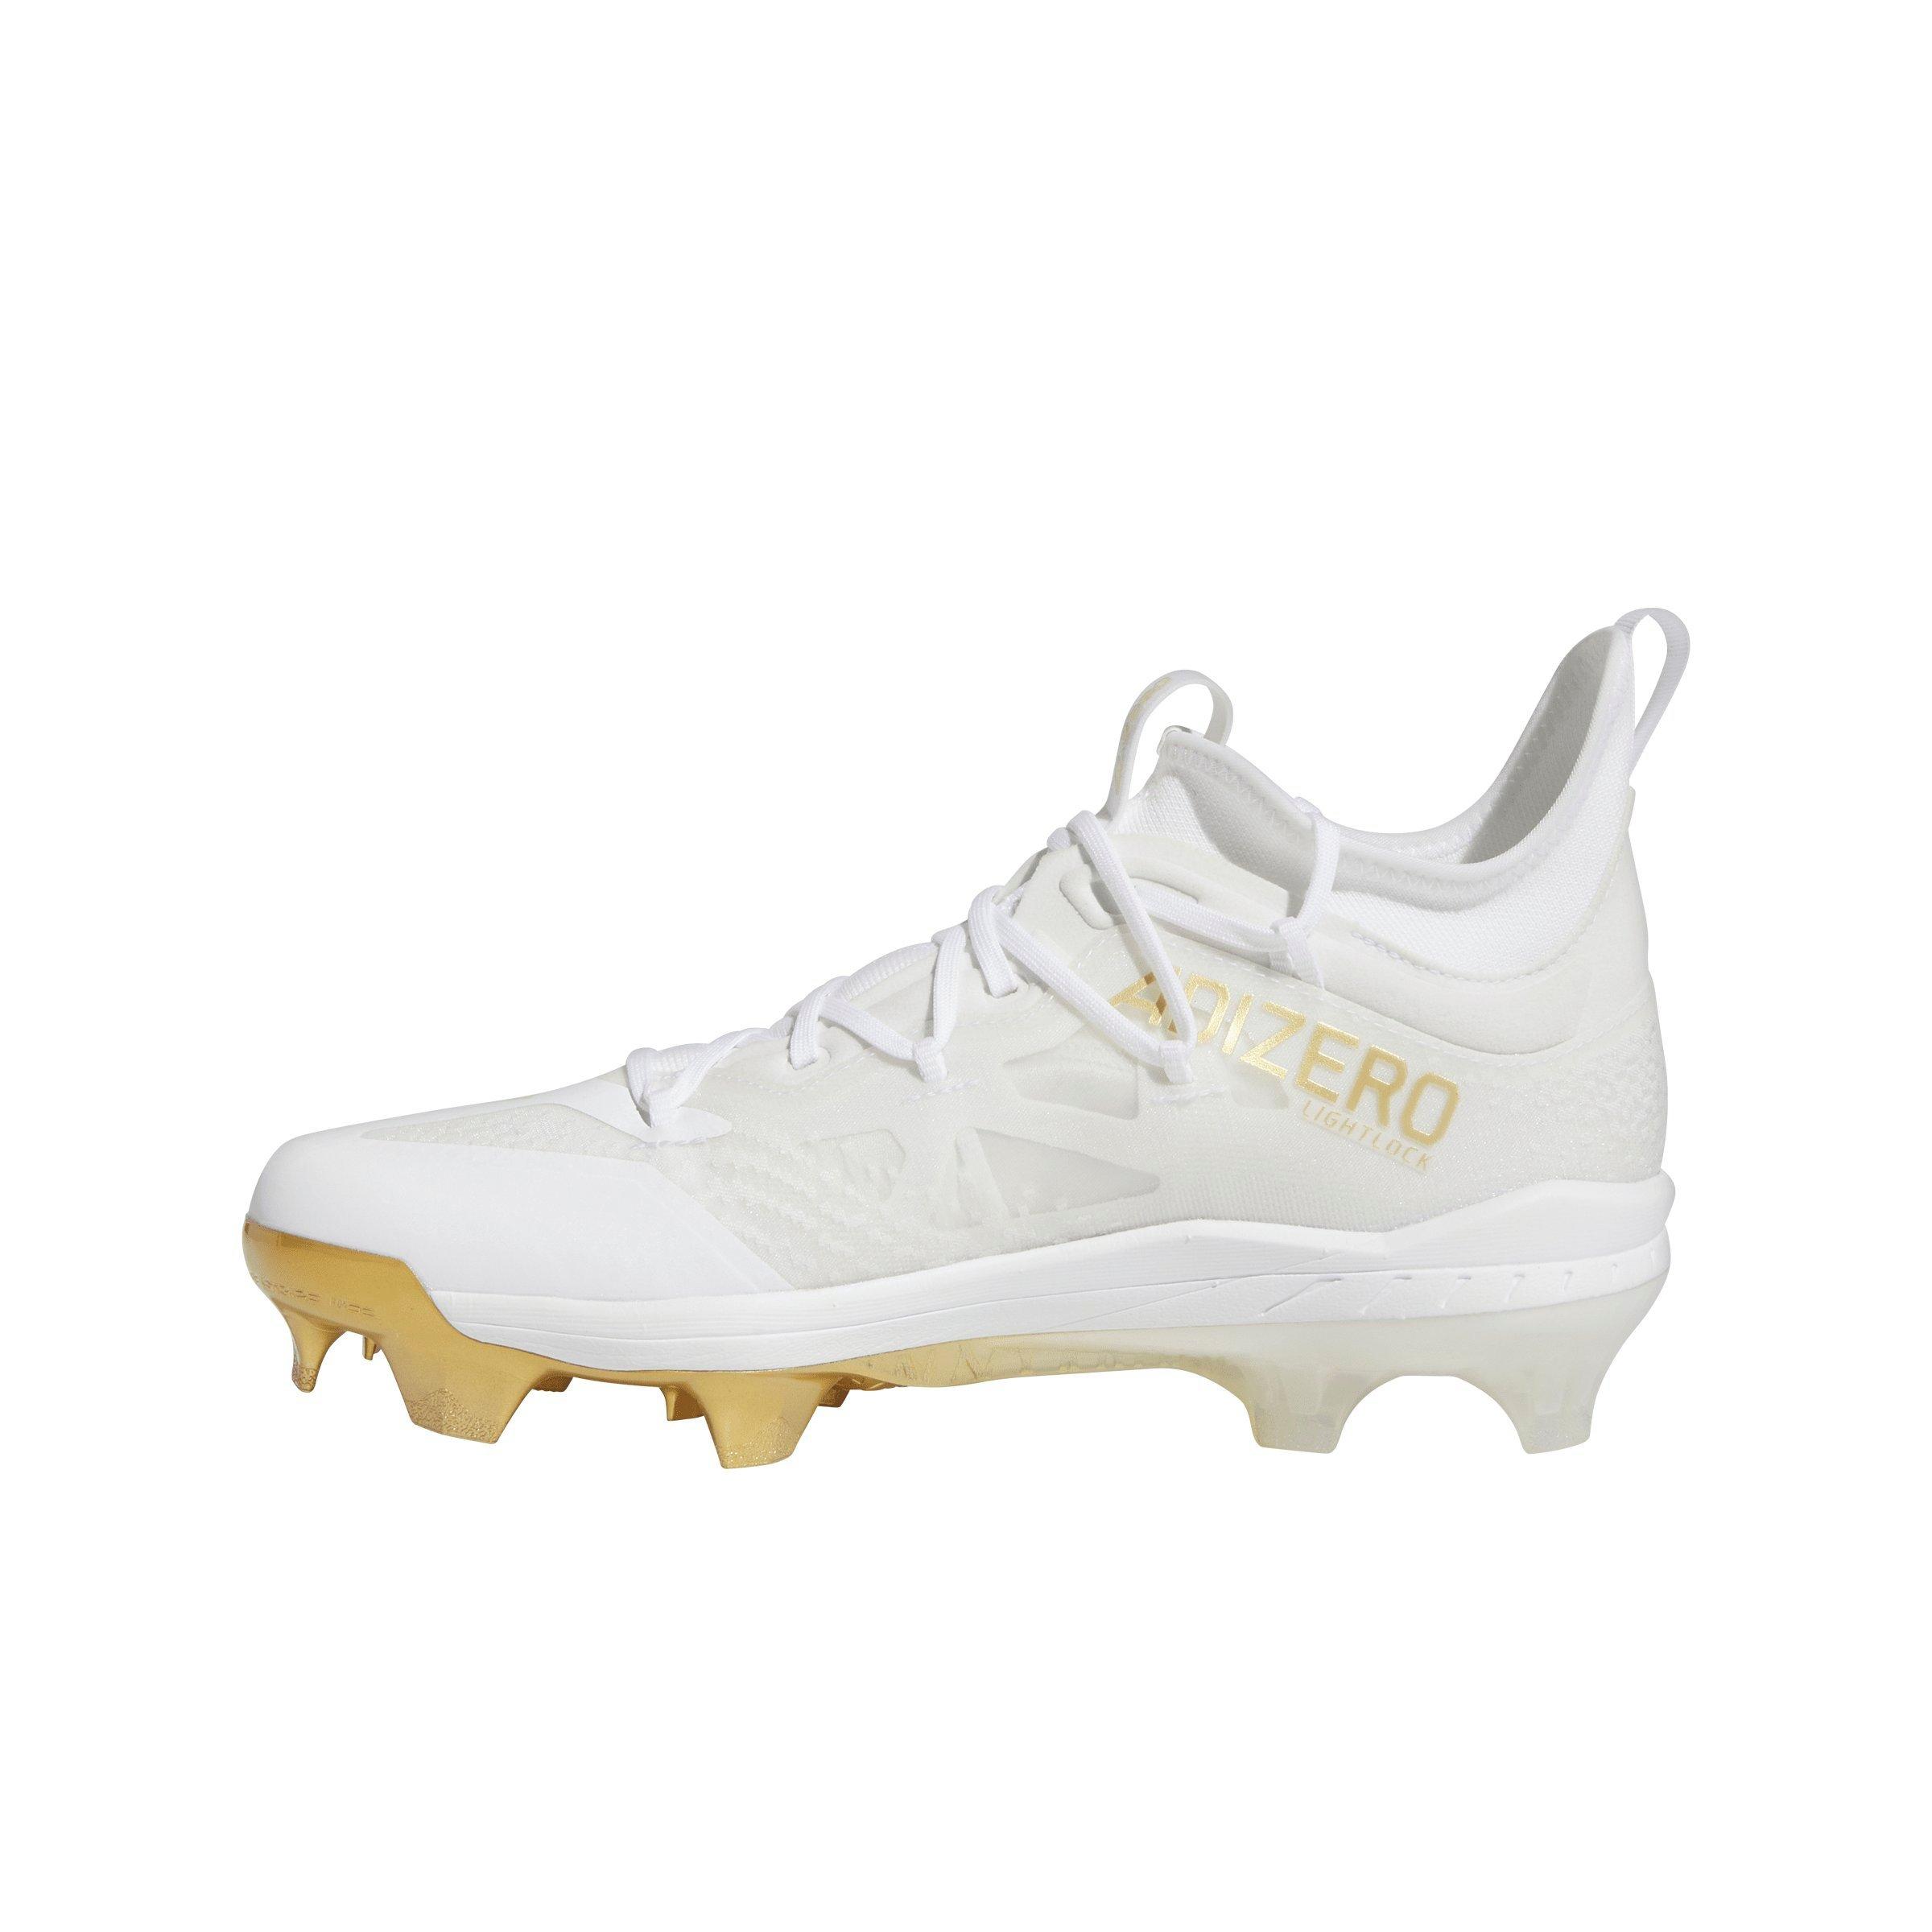 Autographed Adidas AfterBurner 6 Cleats (White/Gold)